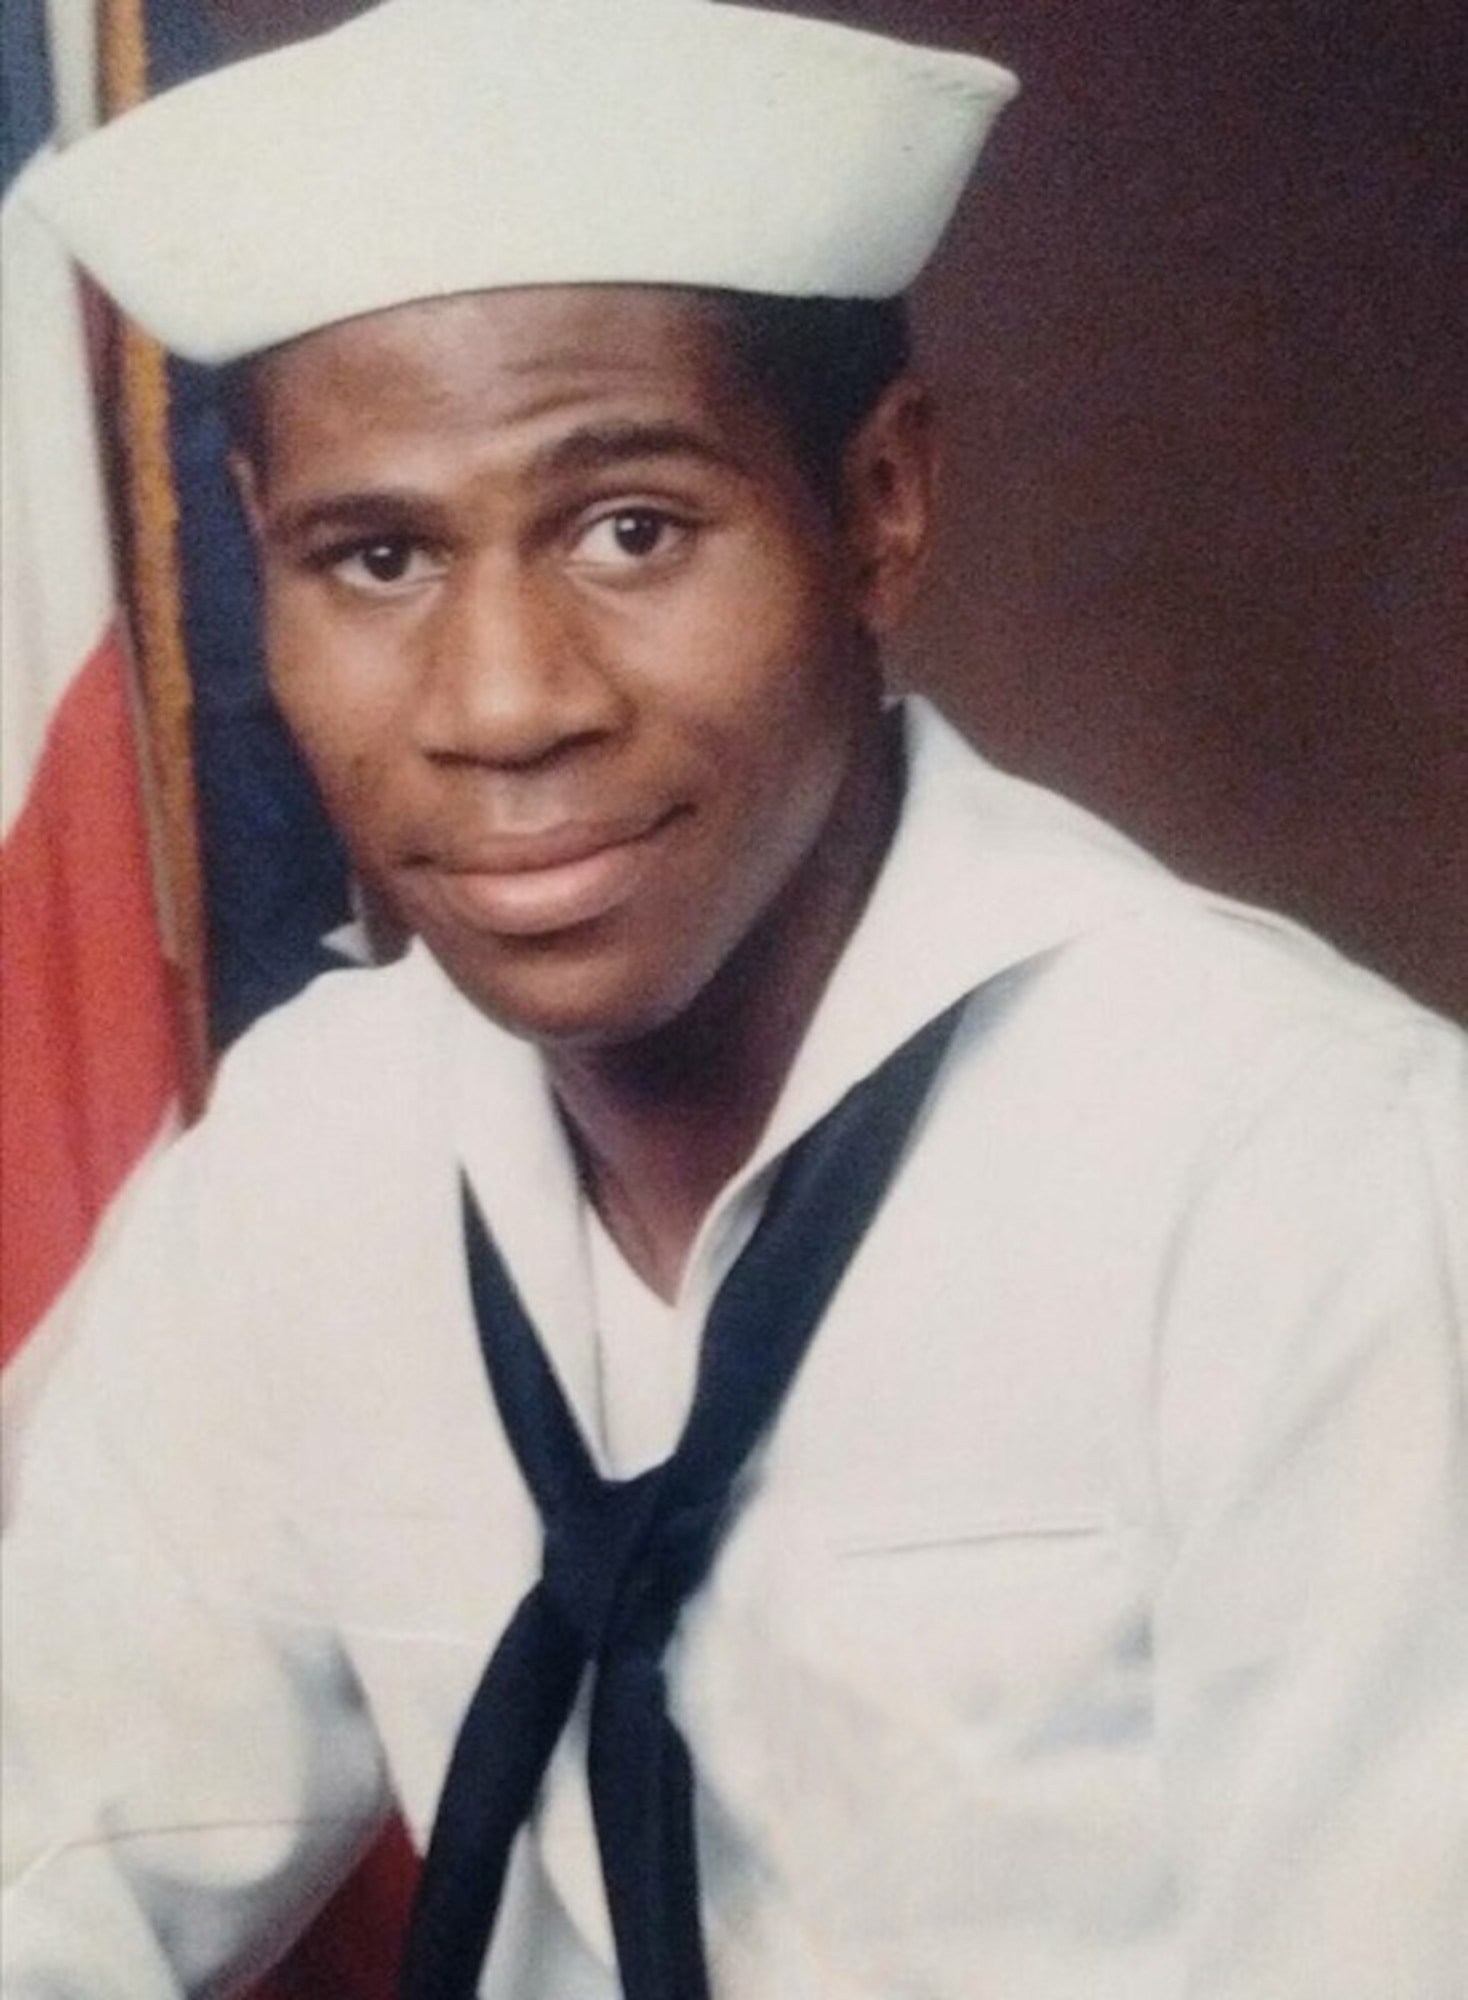 Recruit Martez D. Banks poses for a photo, wearing his dress white uniform, during Navy Boot Camp in 1986.